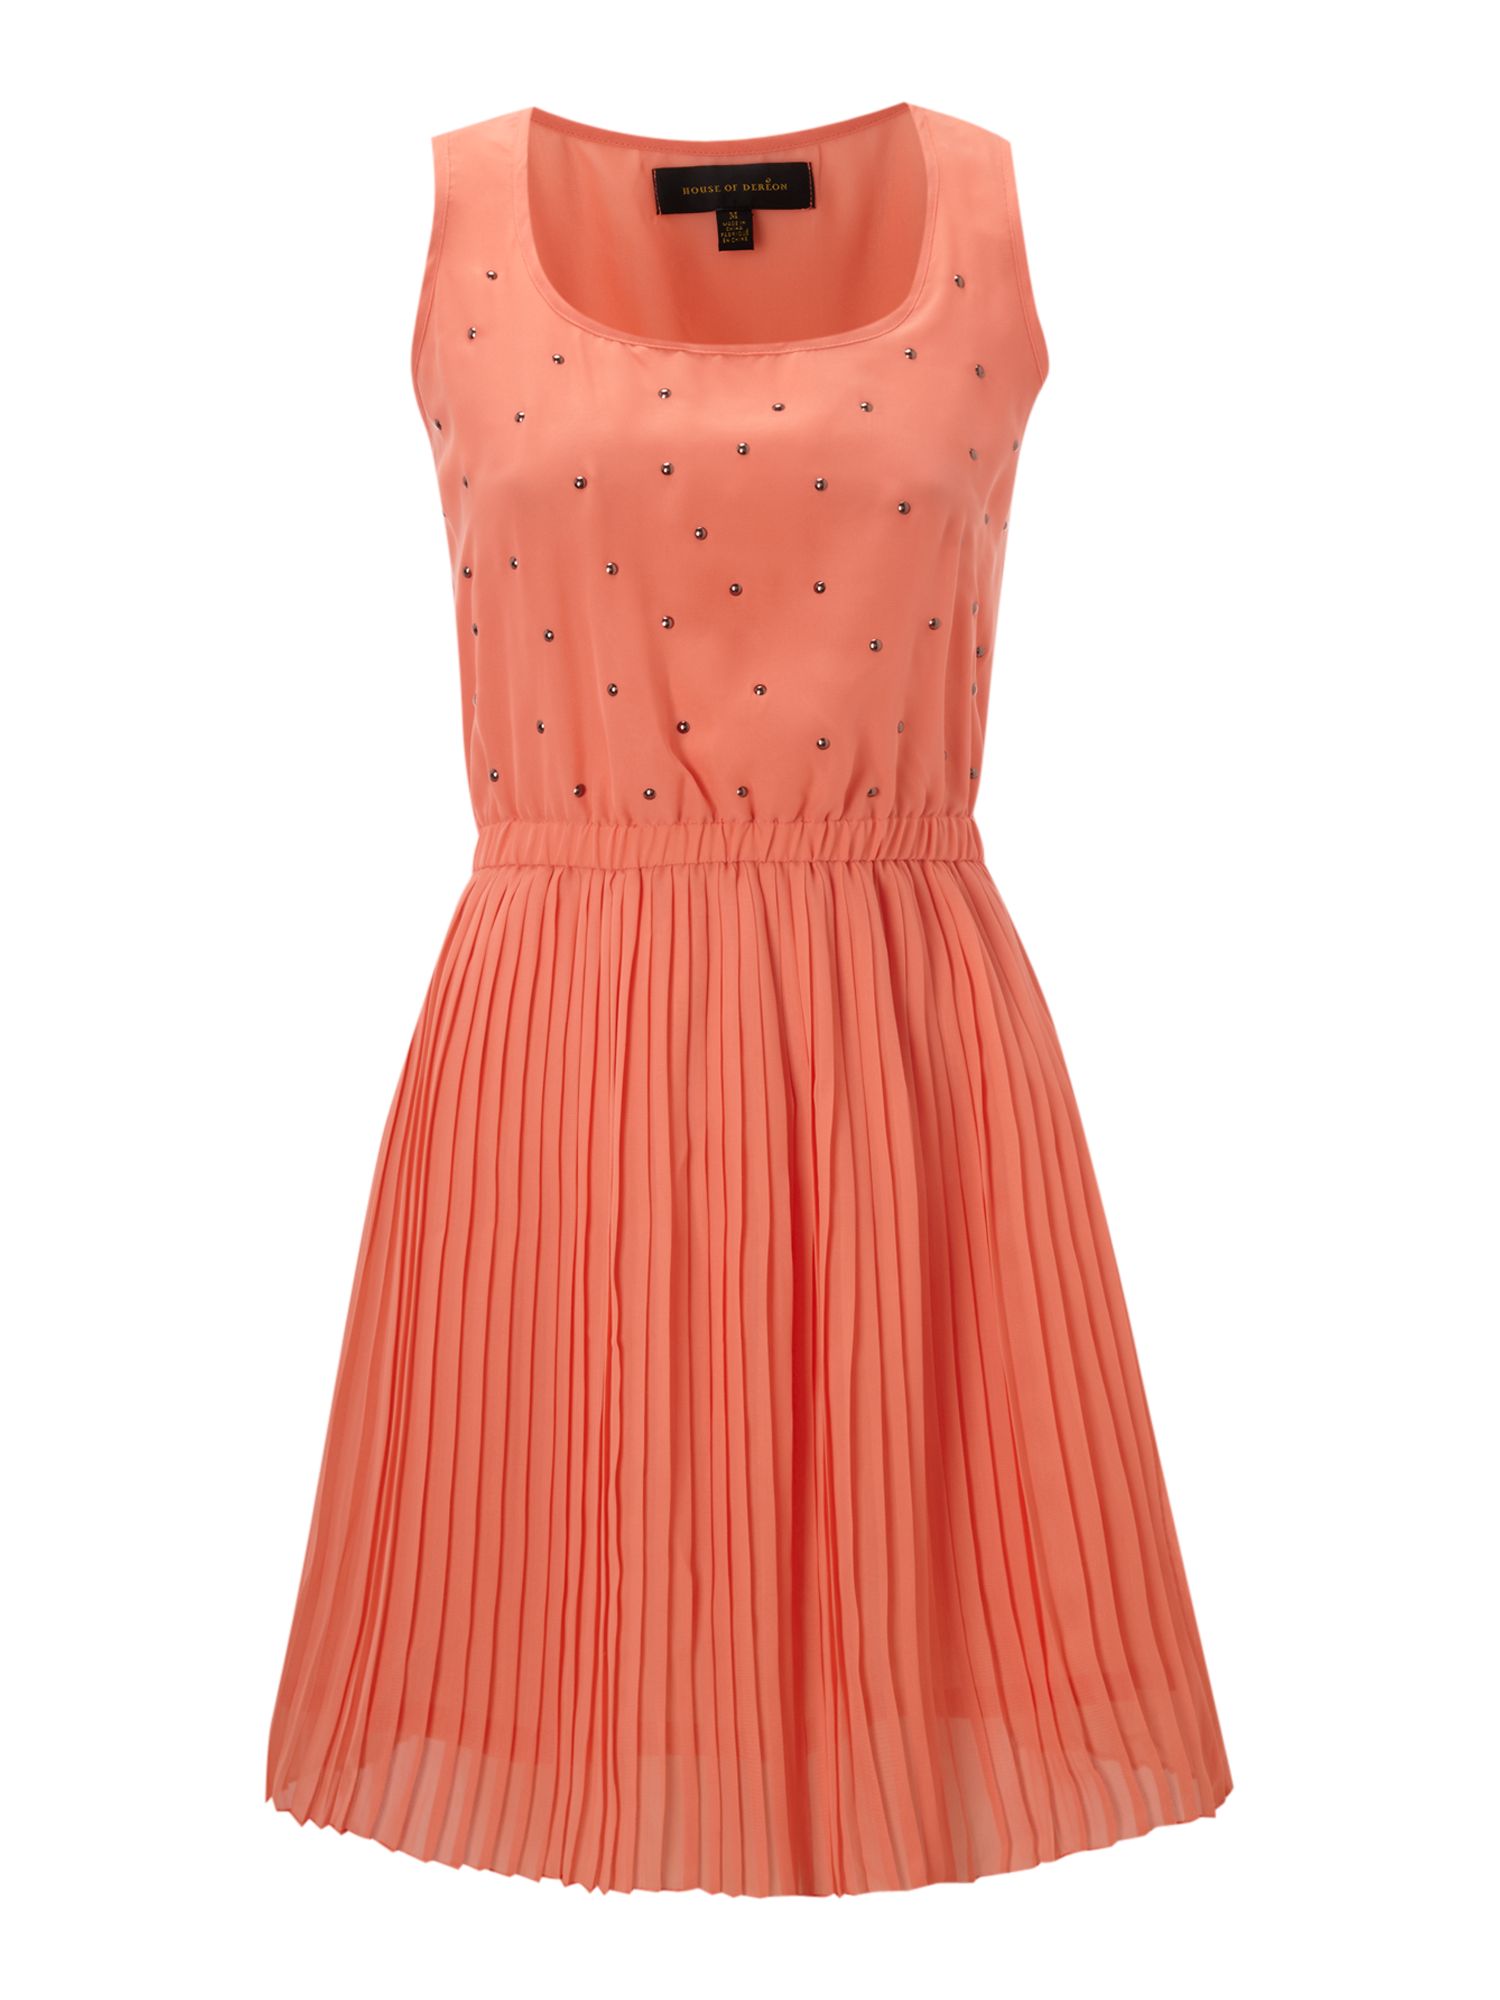 House Of Dereon Studded Dress with Pleated Skirt in Orange (coral) | Lyst